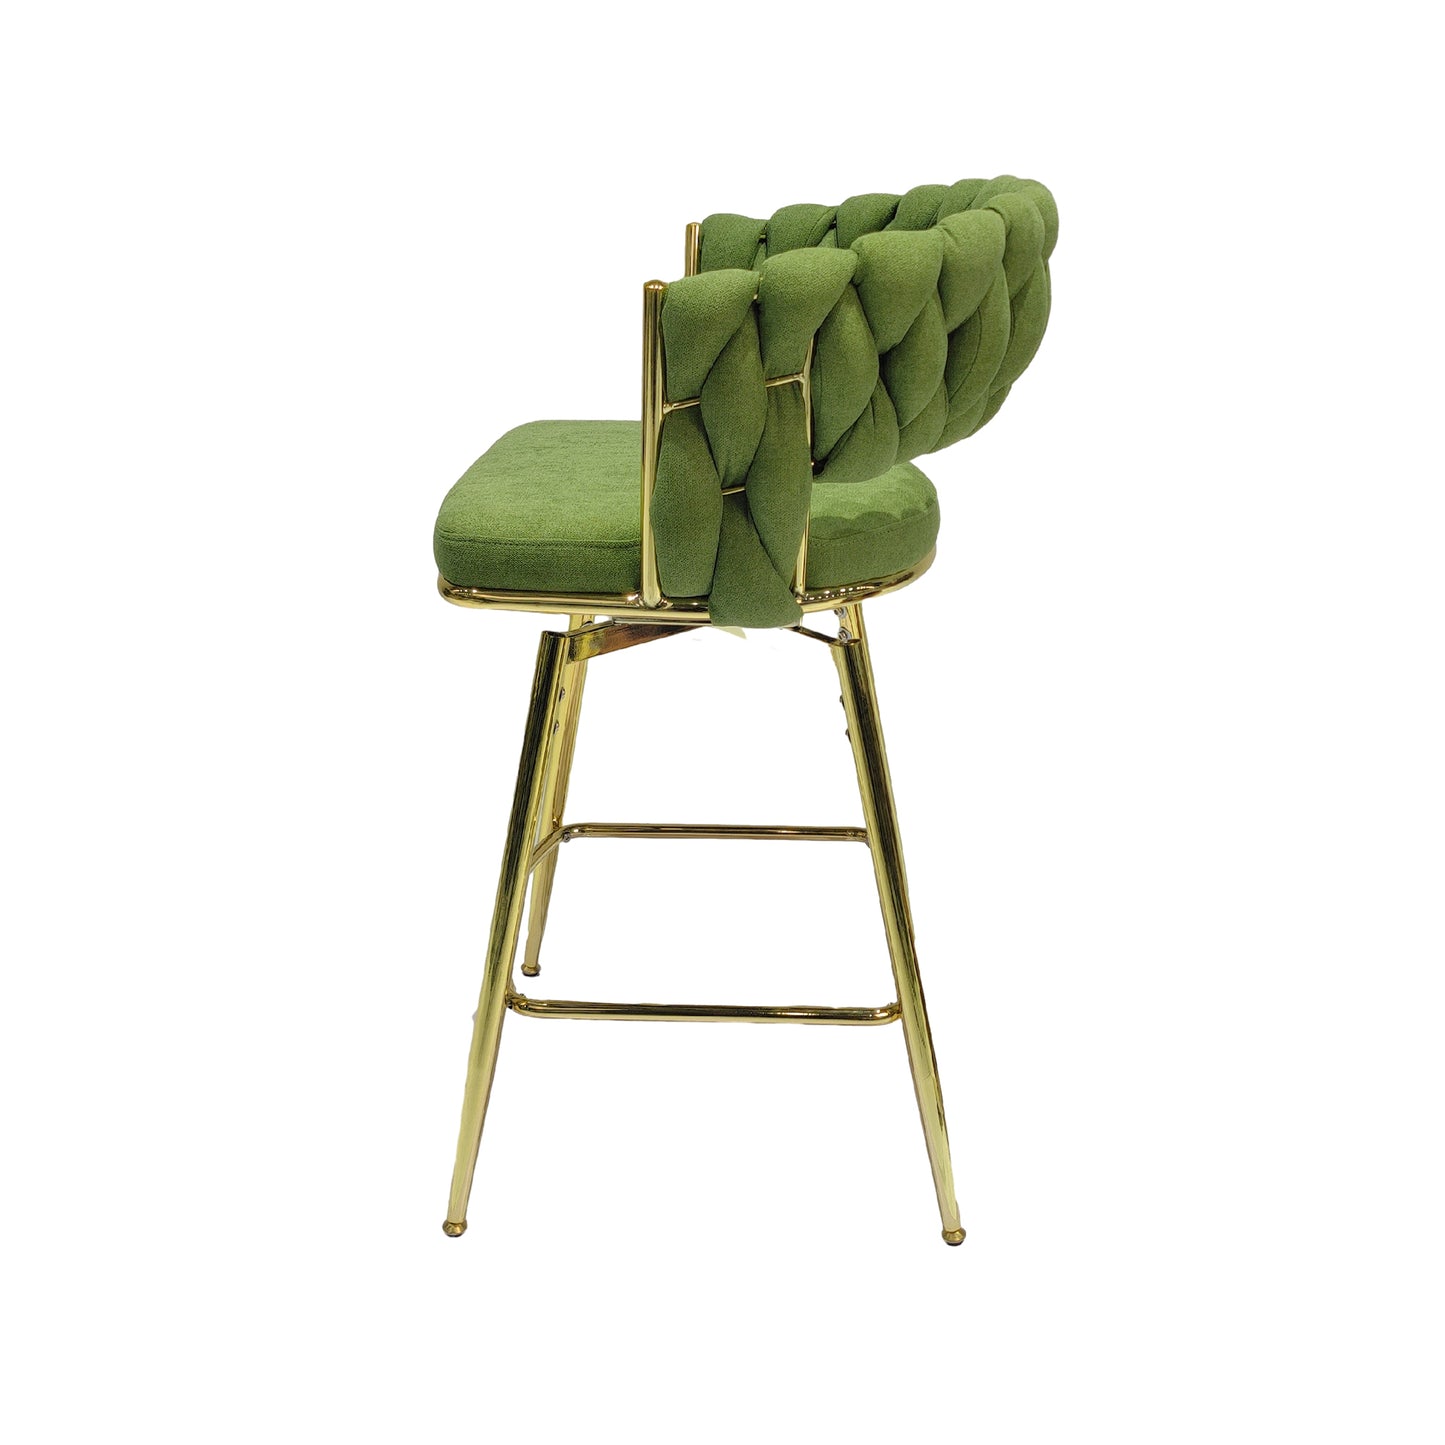 Bar Chair Linen Woven Bar Stool Set of 2,Golden legs Barstools No Adjustable Kitchen Island Chairs,360 Swivel Bar Stools Upholstered Bar Chair Counter Stool Arm Chairs with Back Footrest, (Green)